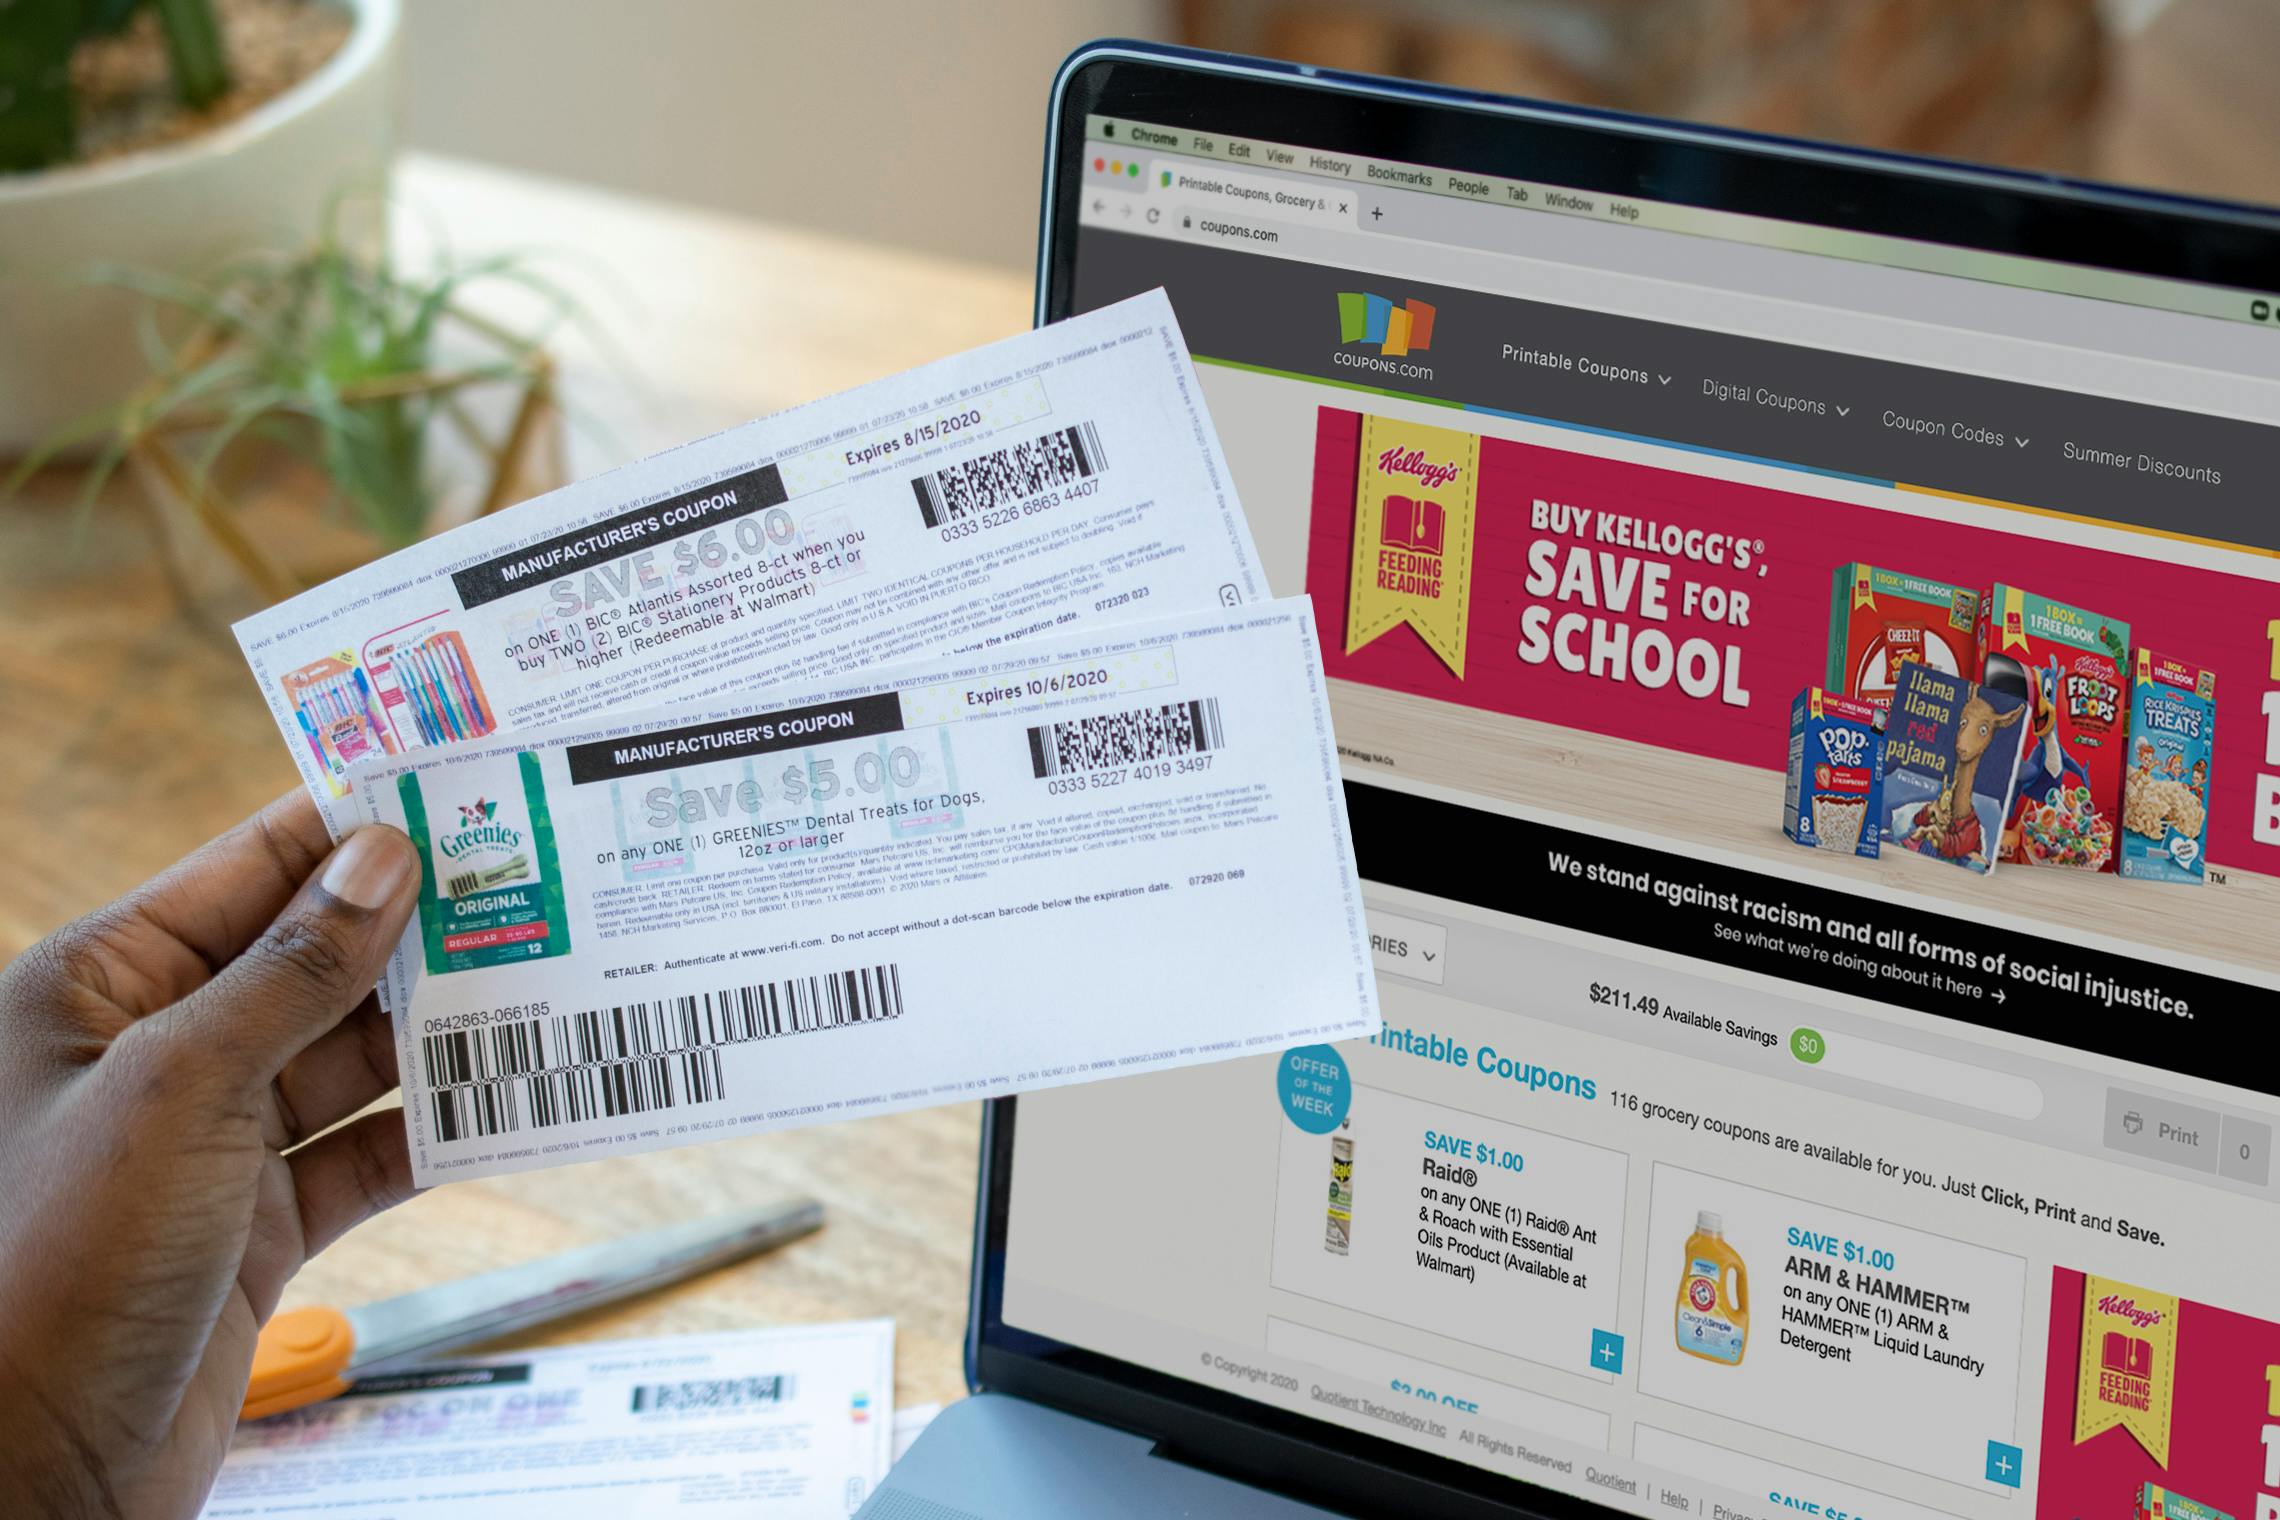 A person holding coupons next to the coupons.com website open on a computer screen.